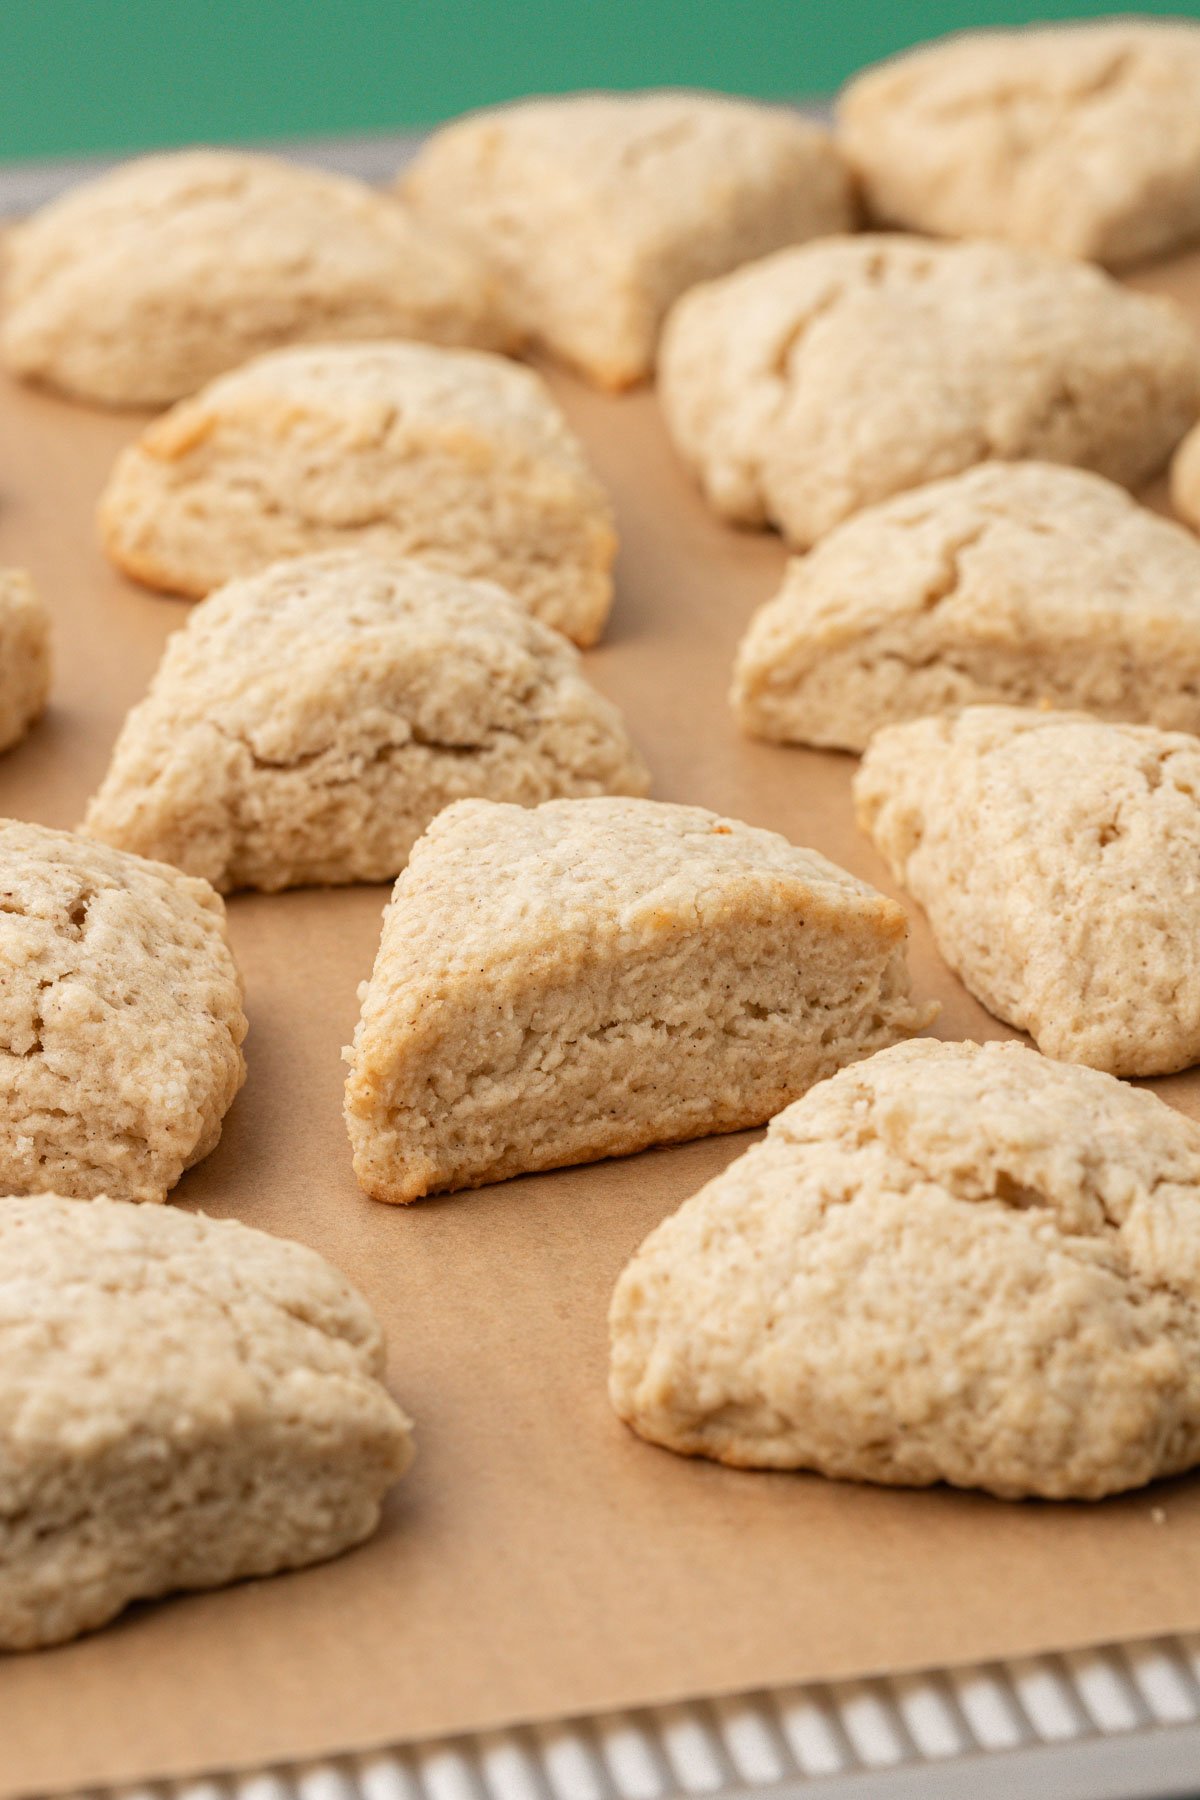 Baked mini vanilla scones on a parchment-lined baking pan.